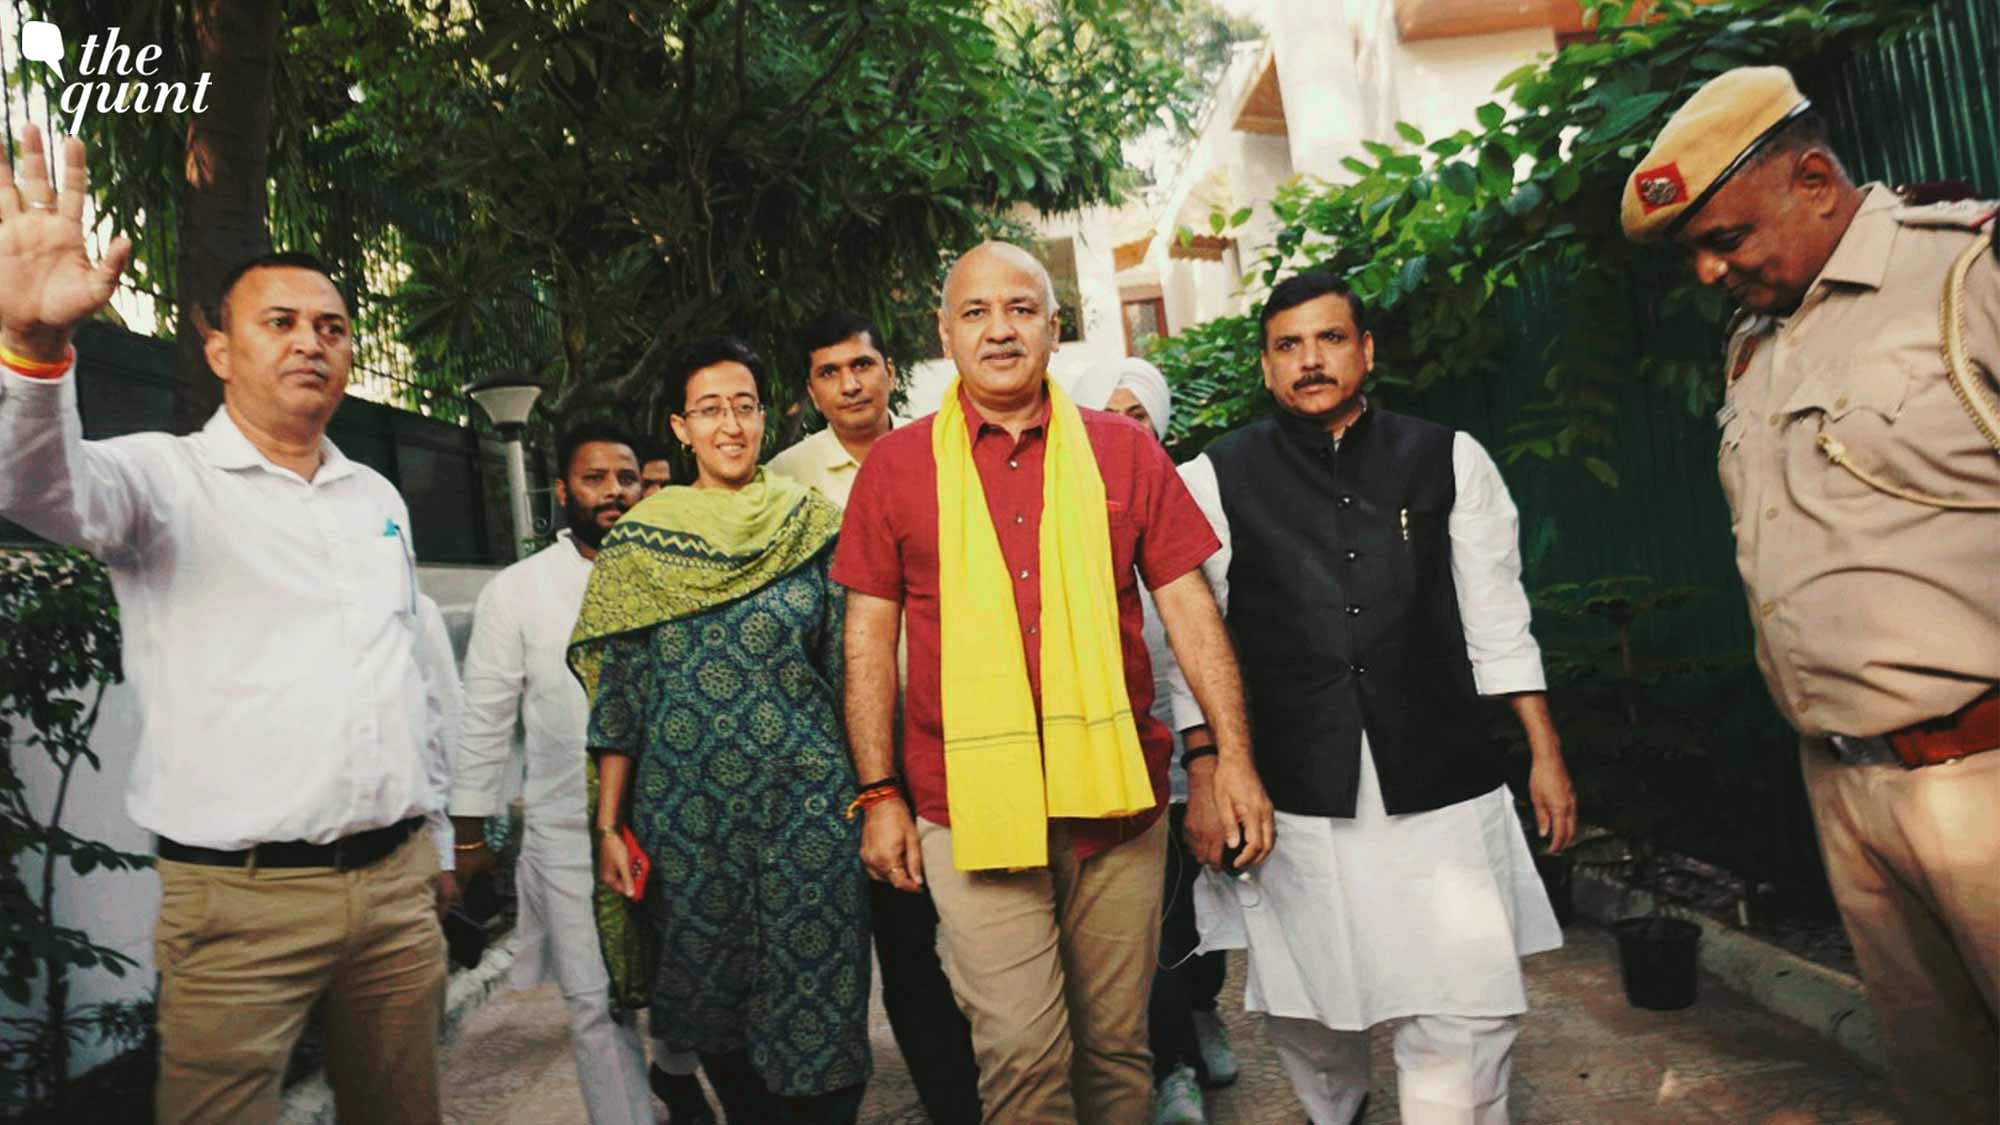 <div class="paragraphs"><p>New Delhi: AAP leaders Sanjay Singh, Atishi and others accompany Delhi Deputy CM Manish Sisodia in solidarity as he leaves for the CBI headquarters.</p></div>